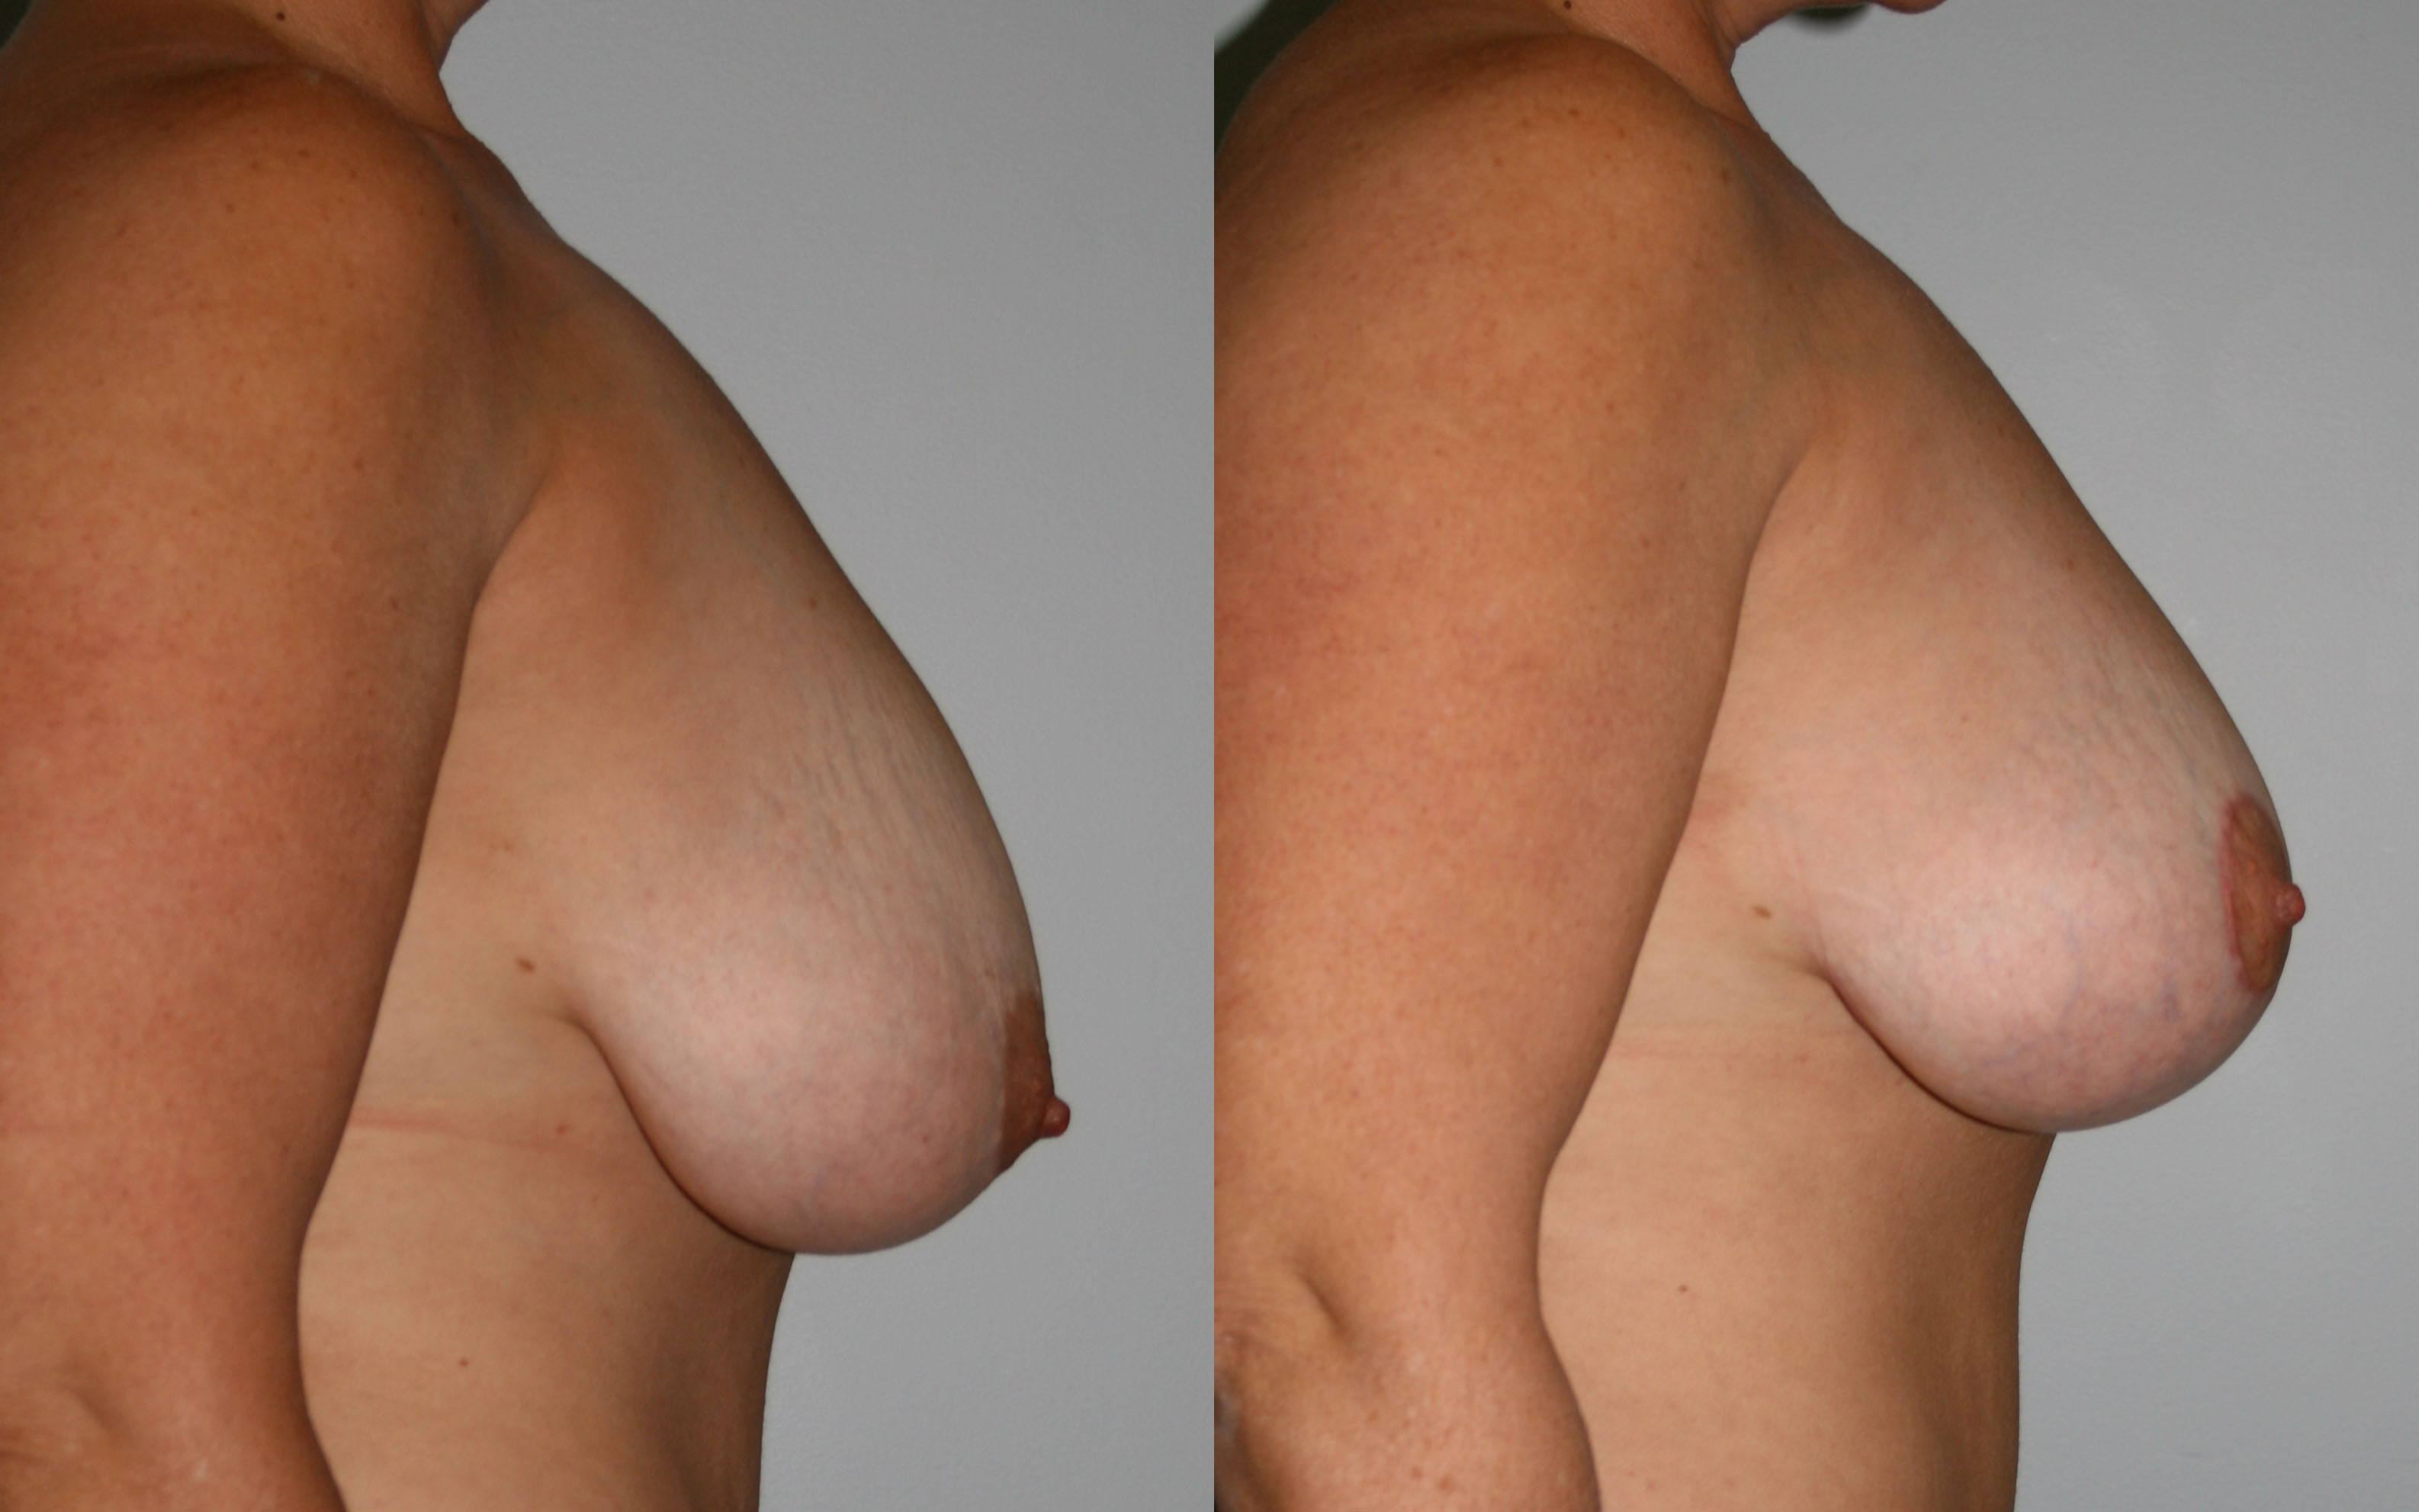 Before and After Breast Lift - Mommy Makeover San Diego